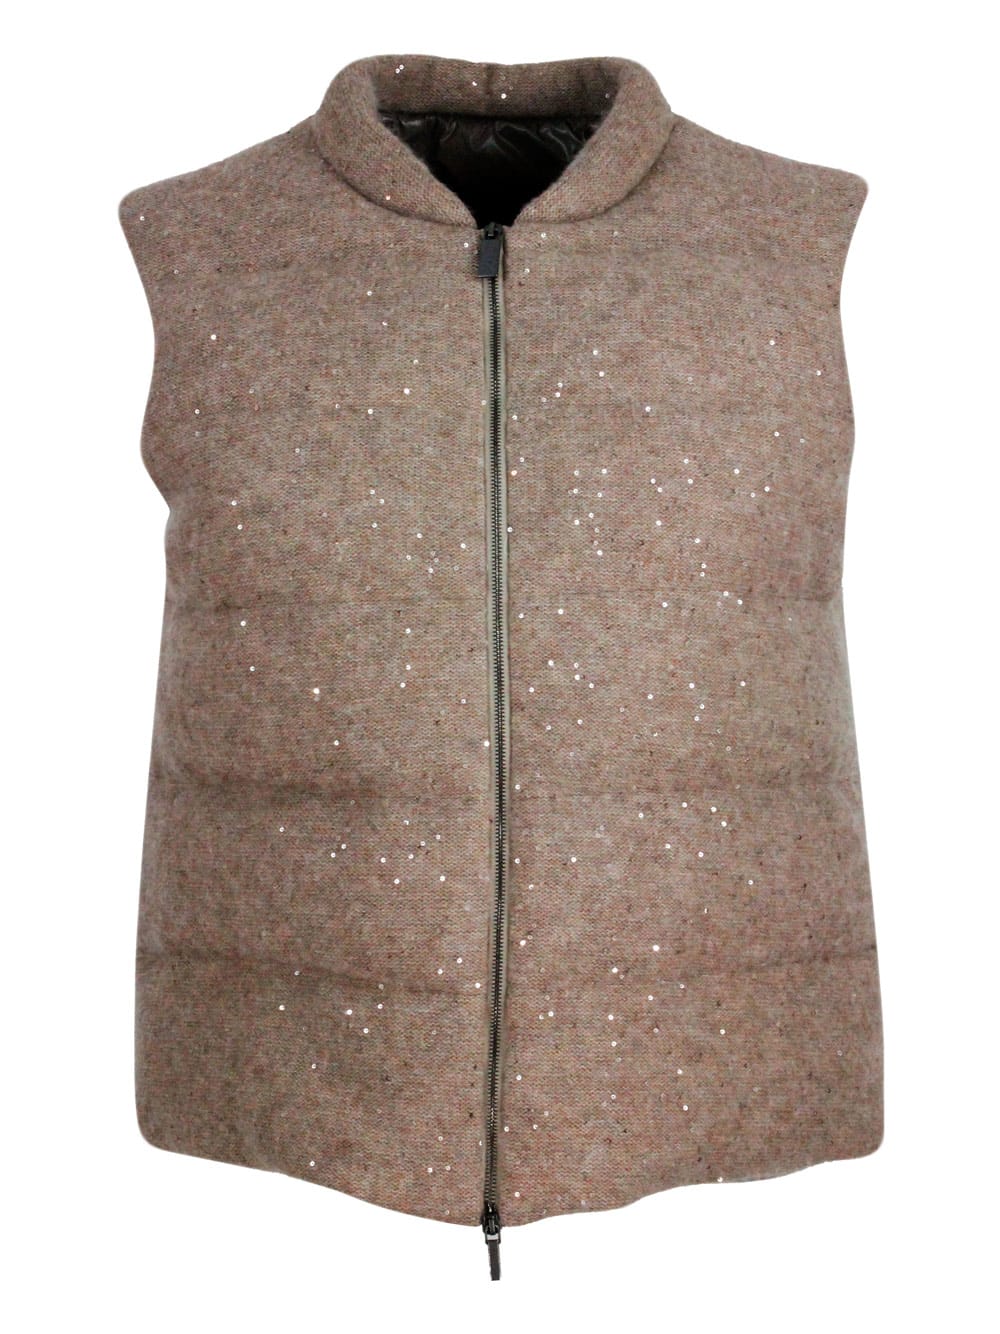 Fabiana Filippi Sleeveless Vest Padded With Real Goose Down In Wool, Silk And Cashmere Embellished With Micro Sequin In Nut